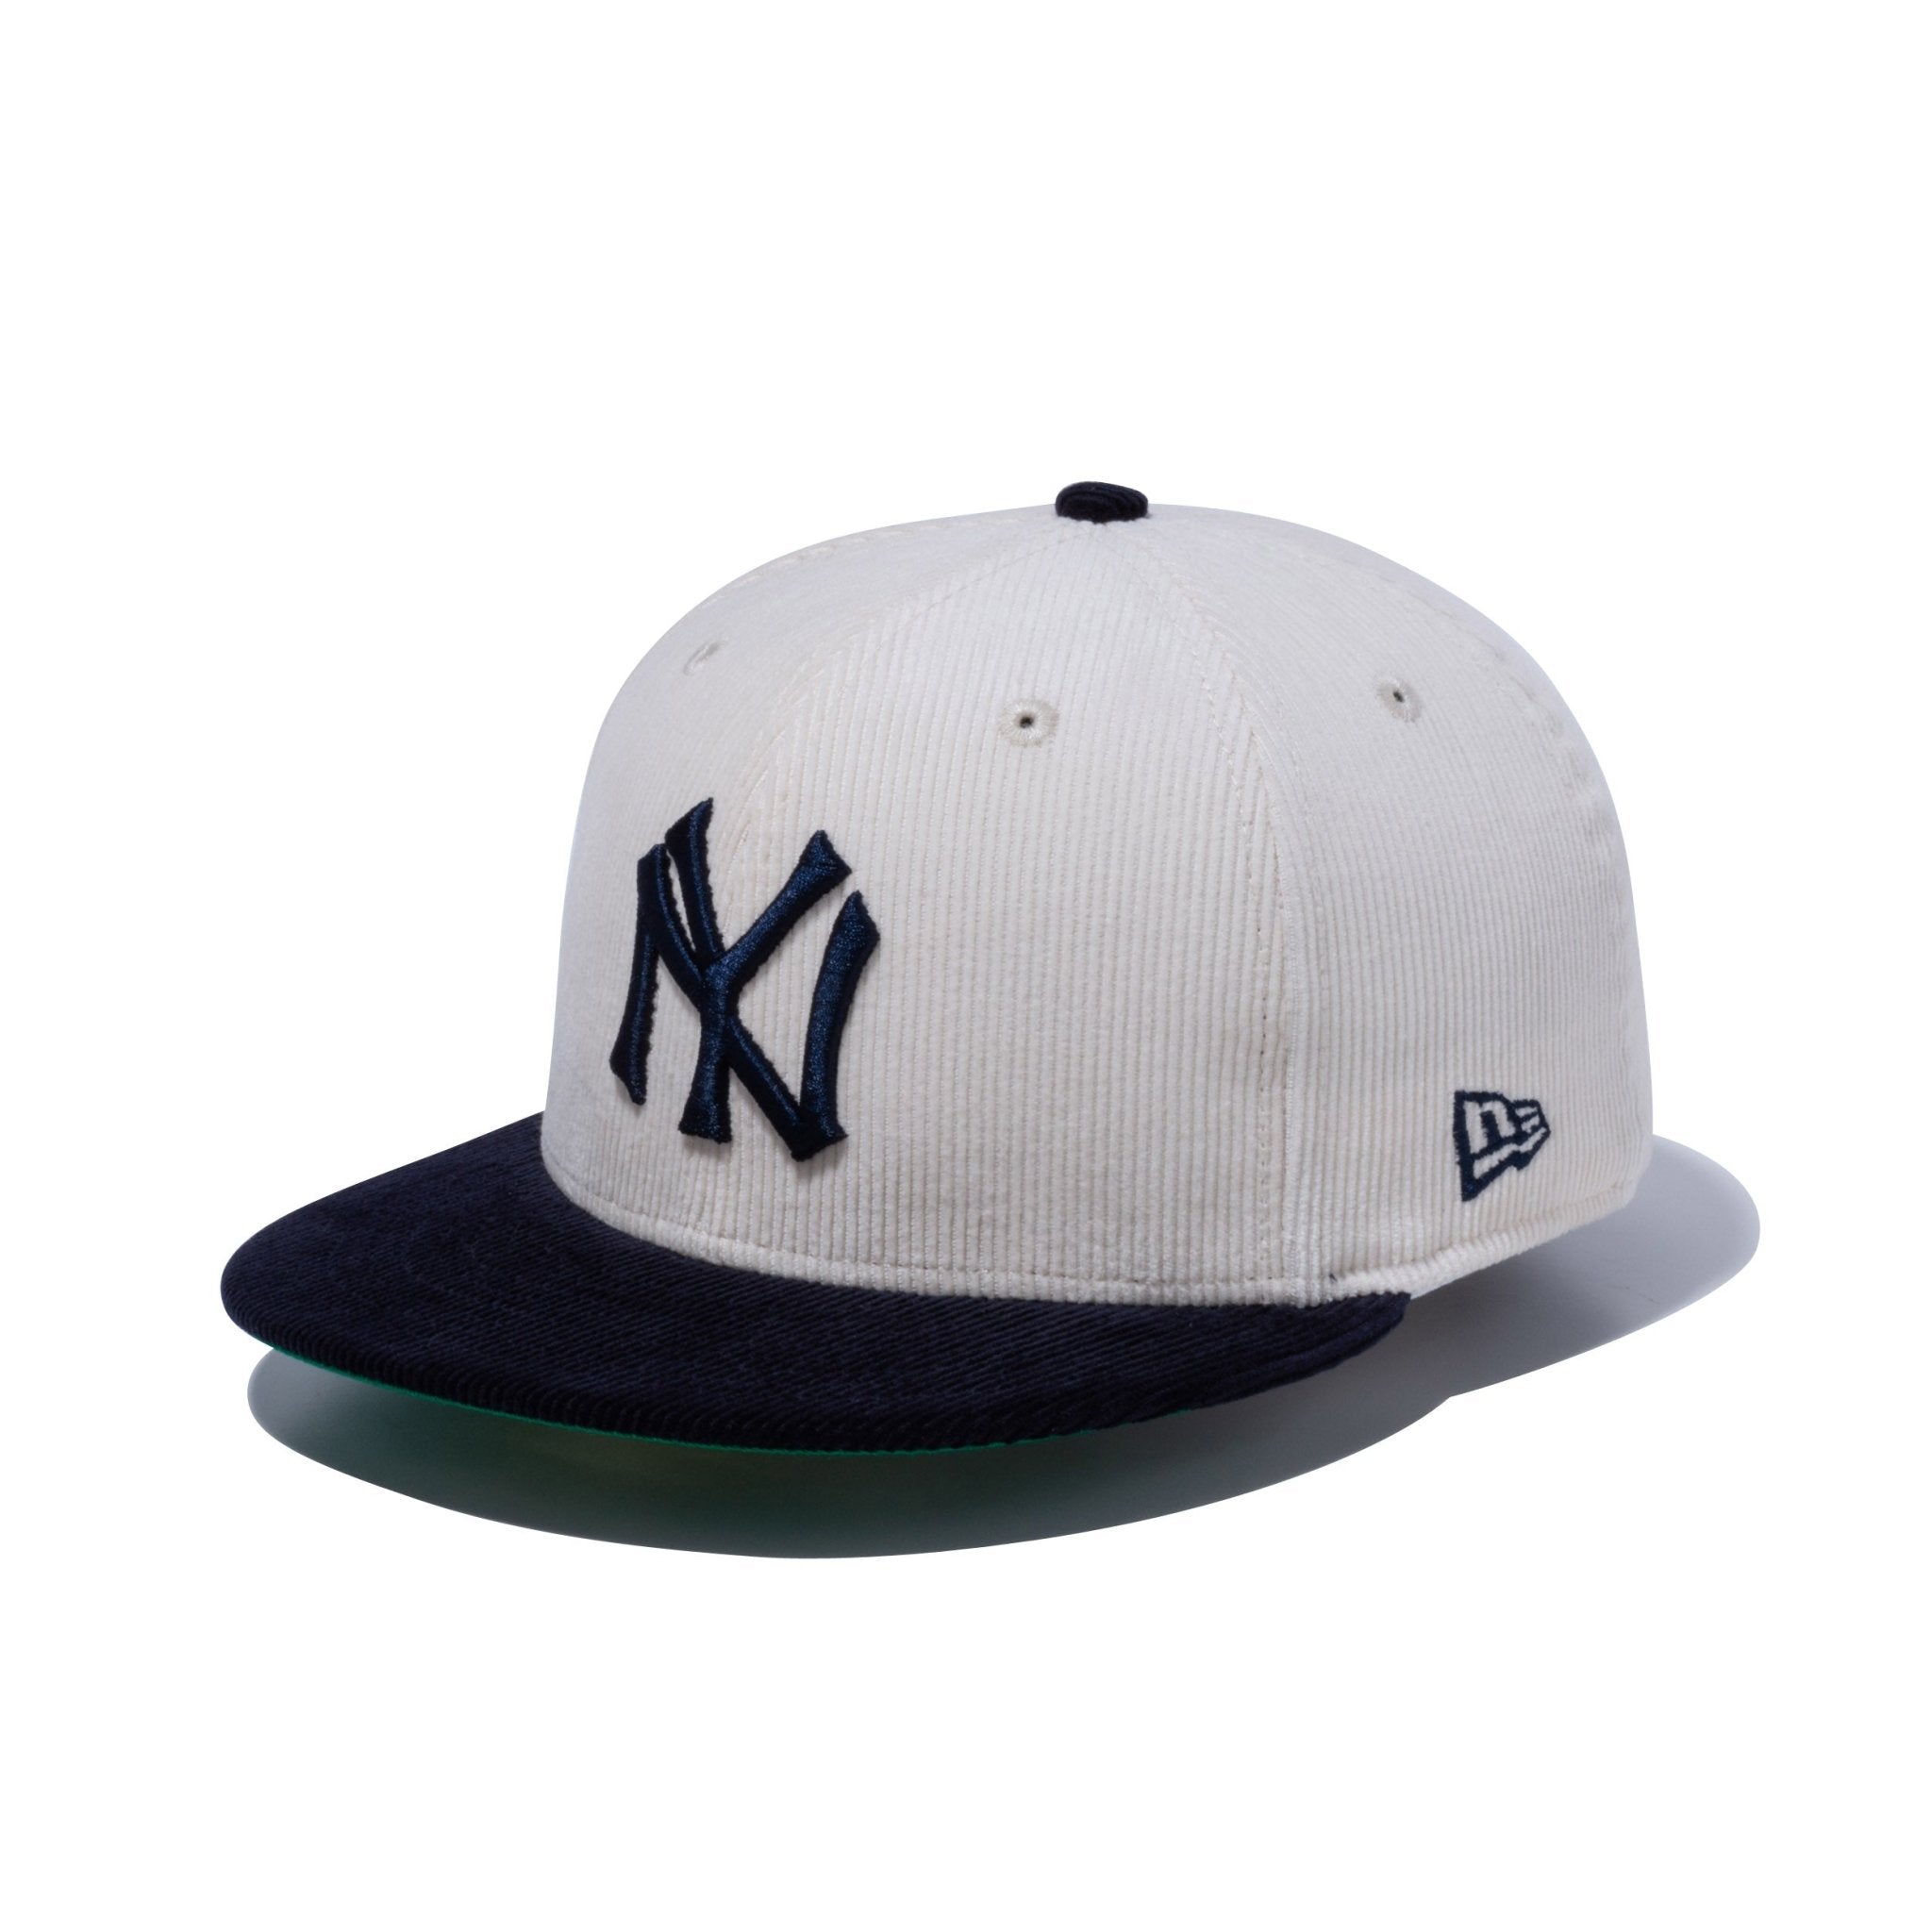 59FIFTY MLB Cooperstown Corduroy クーパーズタウン